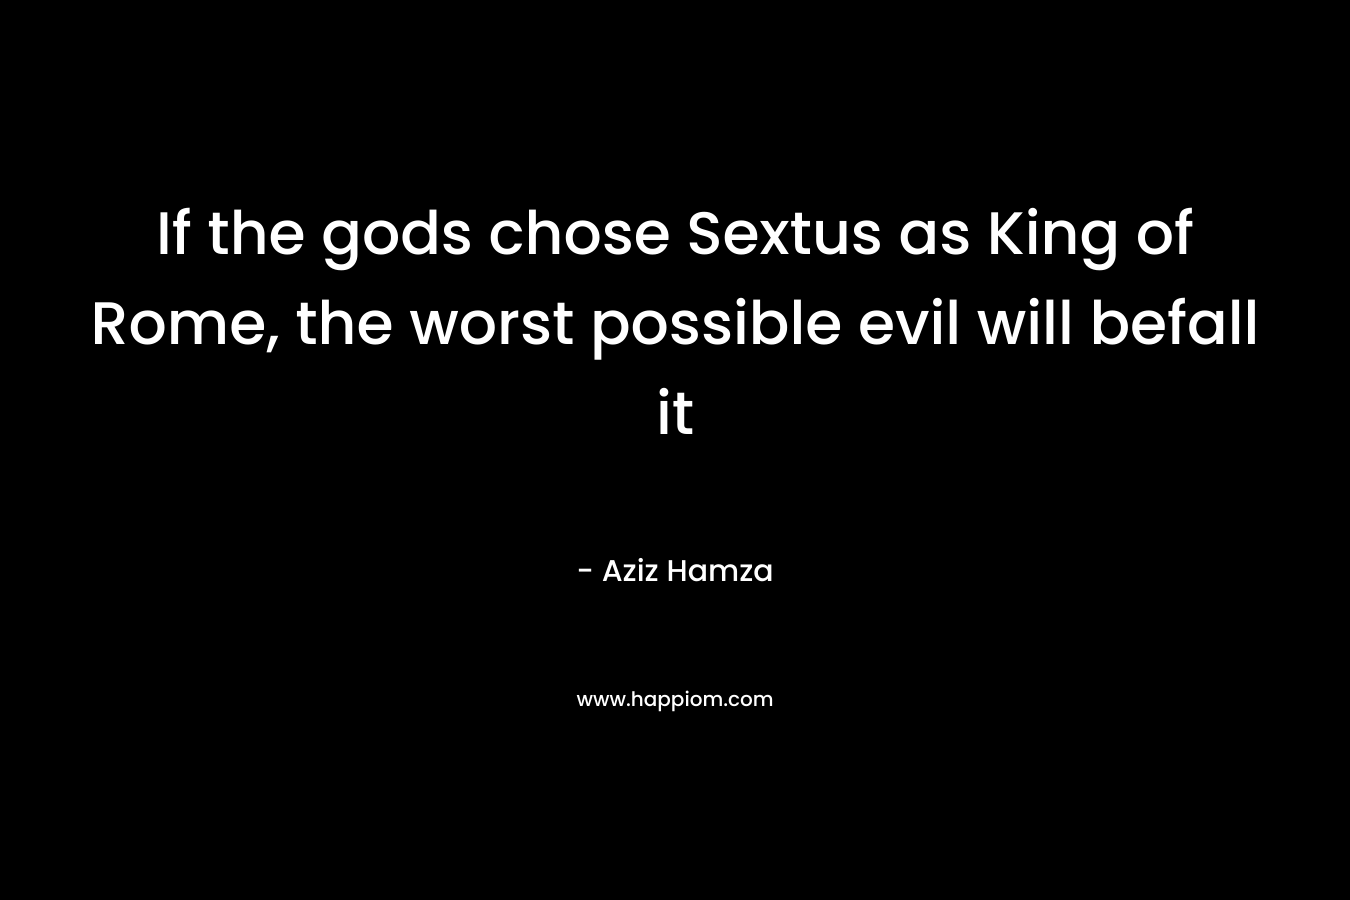 If the gods chose Sextus as King of Rome, the worst possible evil will befall it